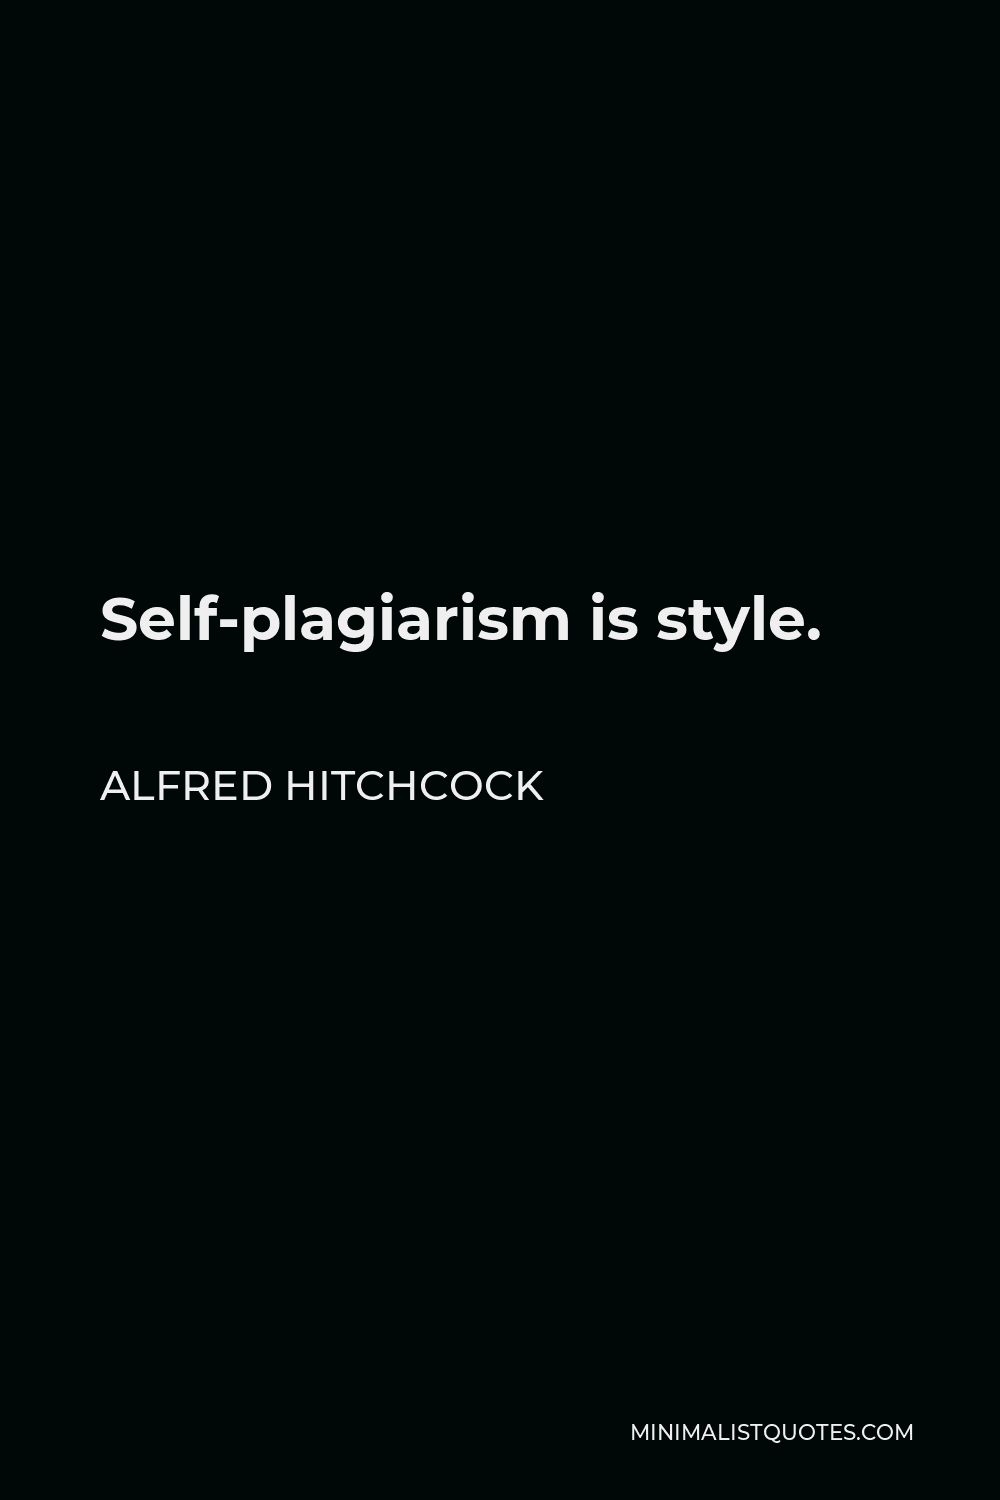 Alfred Hitchcock Quote - Self-plagiarism is style.